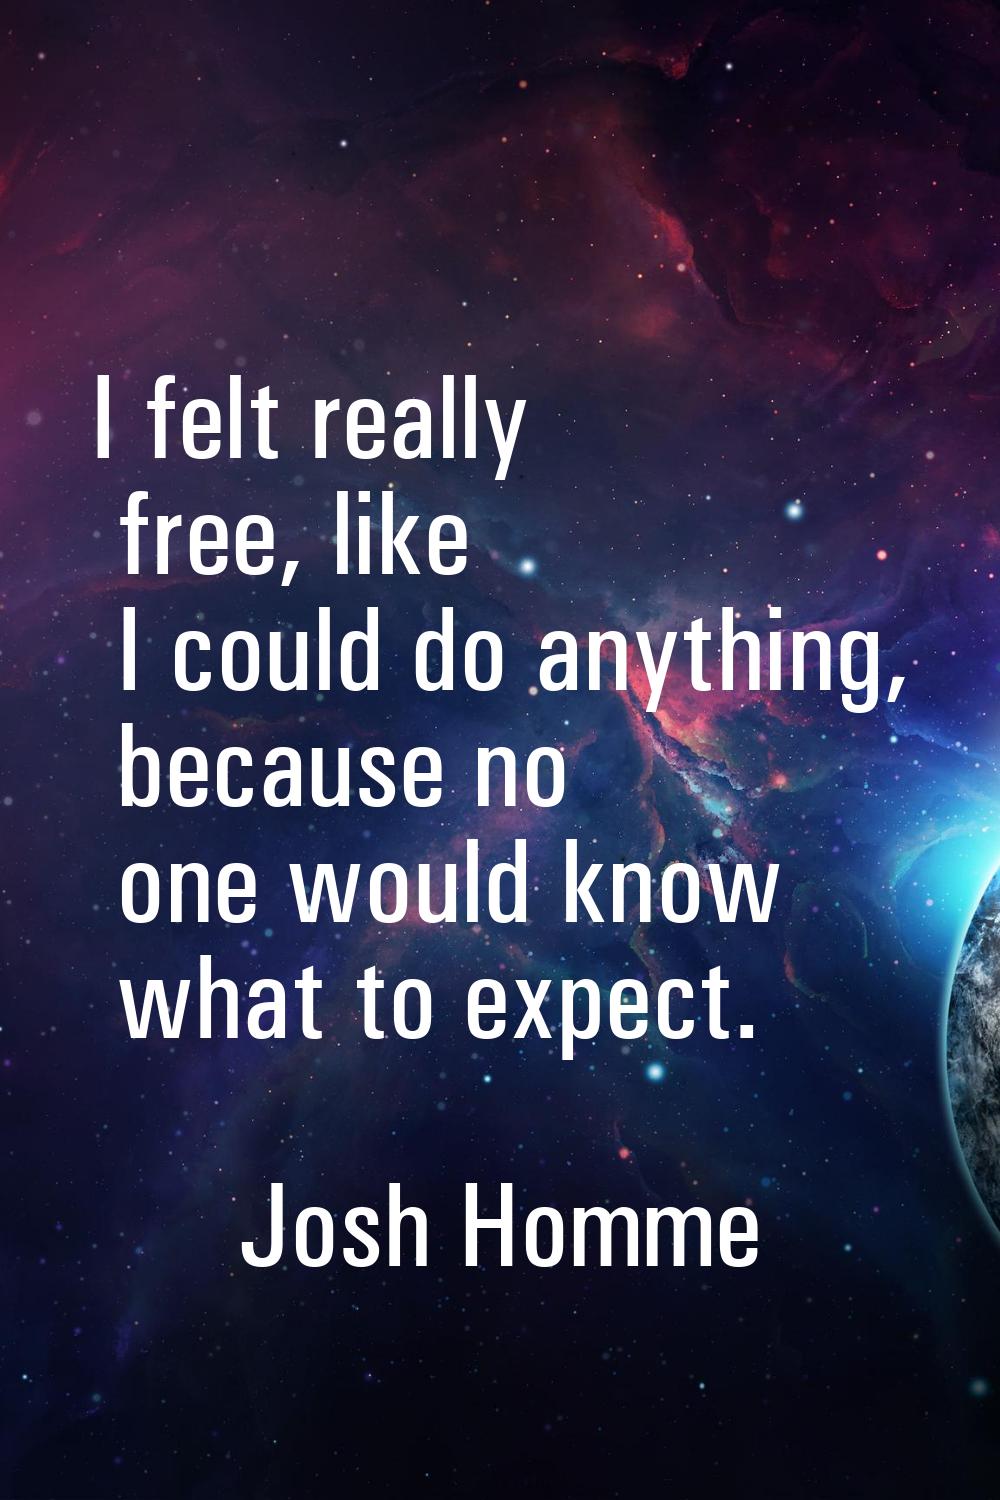 I felt really free, like I could do anything, because no one would know what to expect.